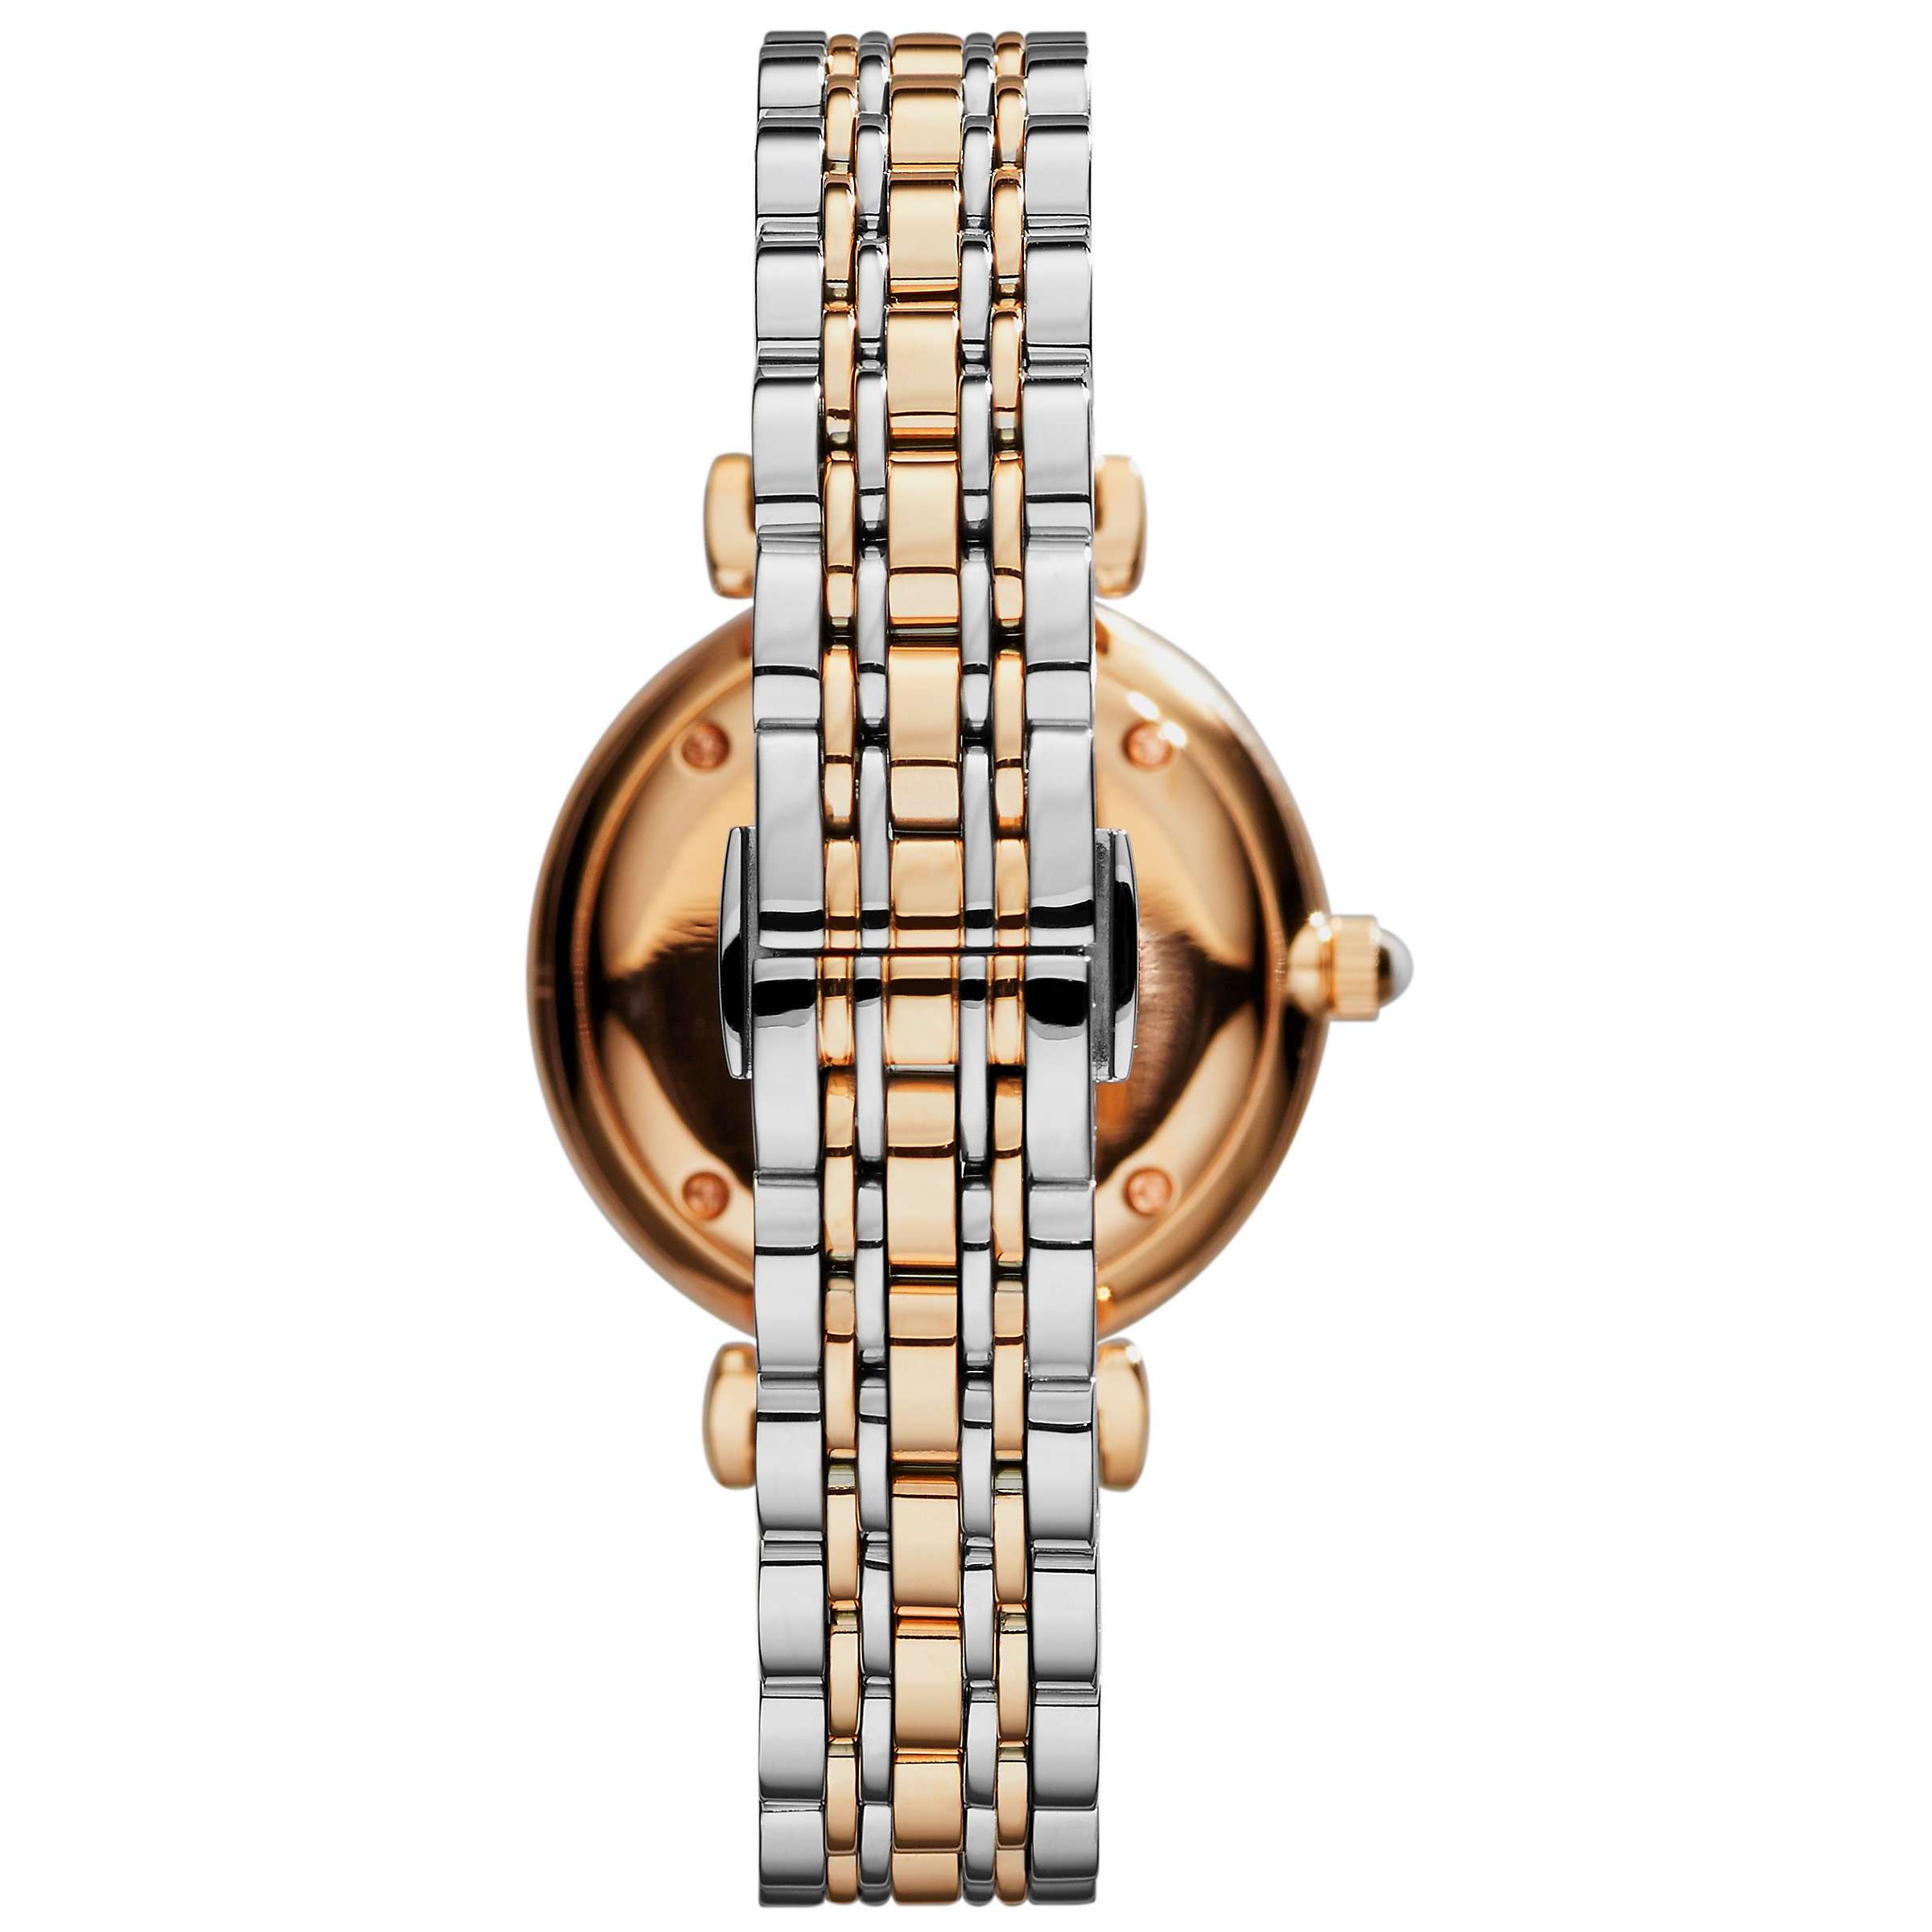 Buy Emporio Armani AR1840 Women's Two Tone Bracelet Strap Watch, Silver/Rose Gold Online at johnlewis.com